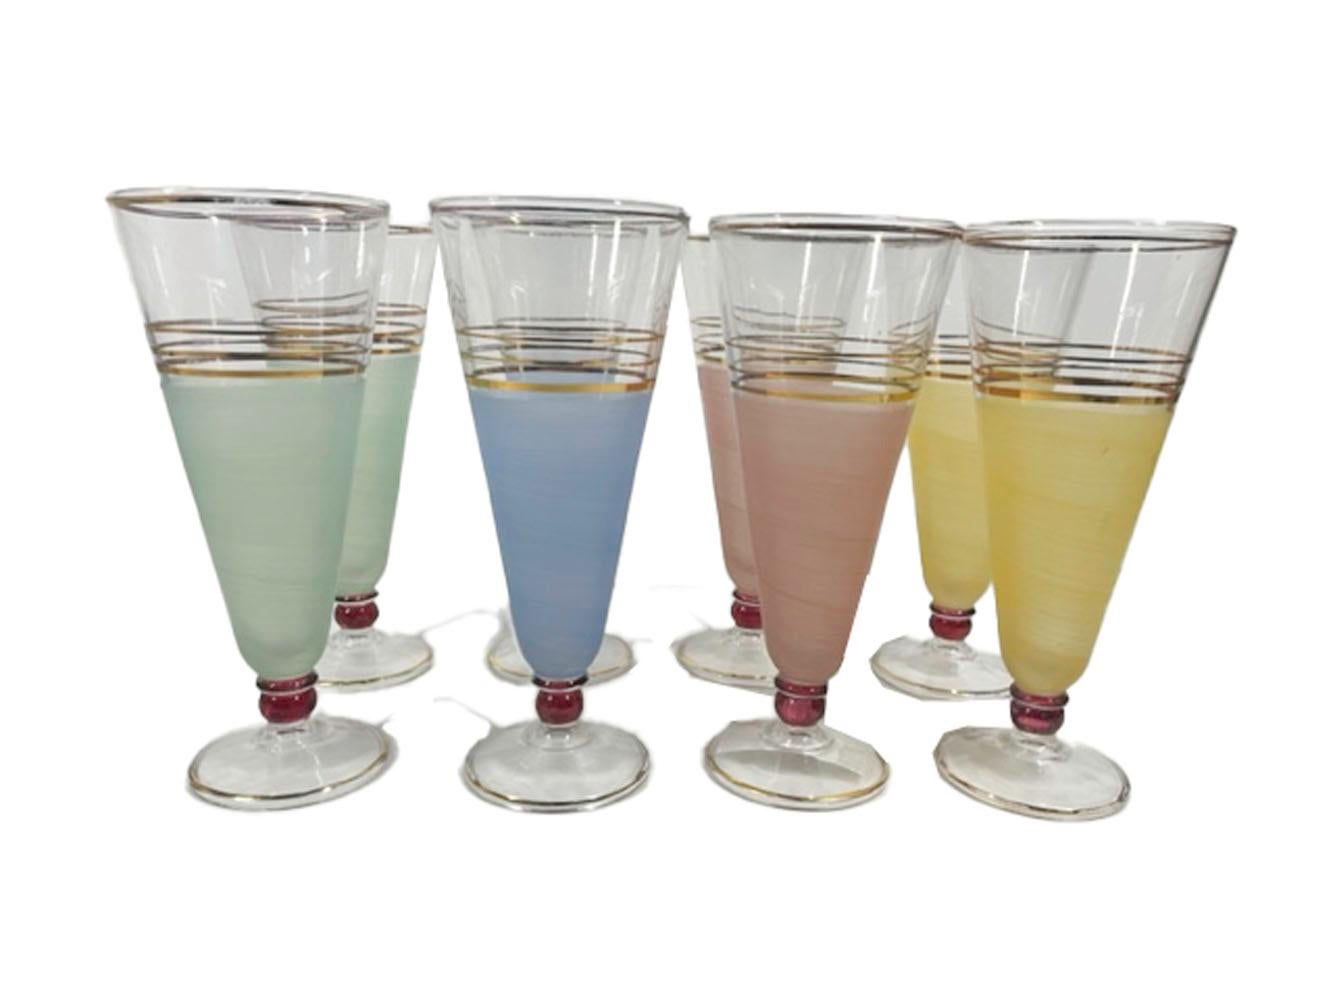 Eight Mid-Century Modern pilsner glasses of taper form, color-frosted lower two thirds below clear tops with 22k gold accent, supported on a cranberry flashed ball above a raised dome foot. The set is comprised of two each, pink, yellow, green and